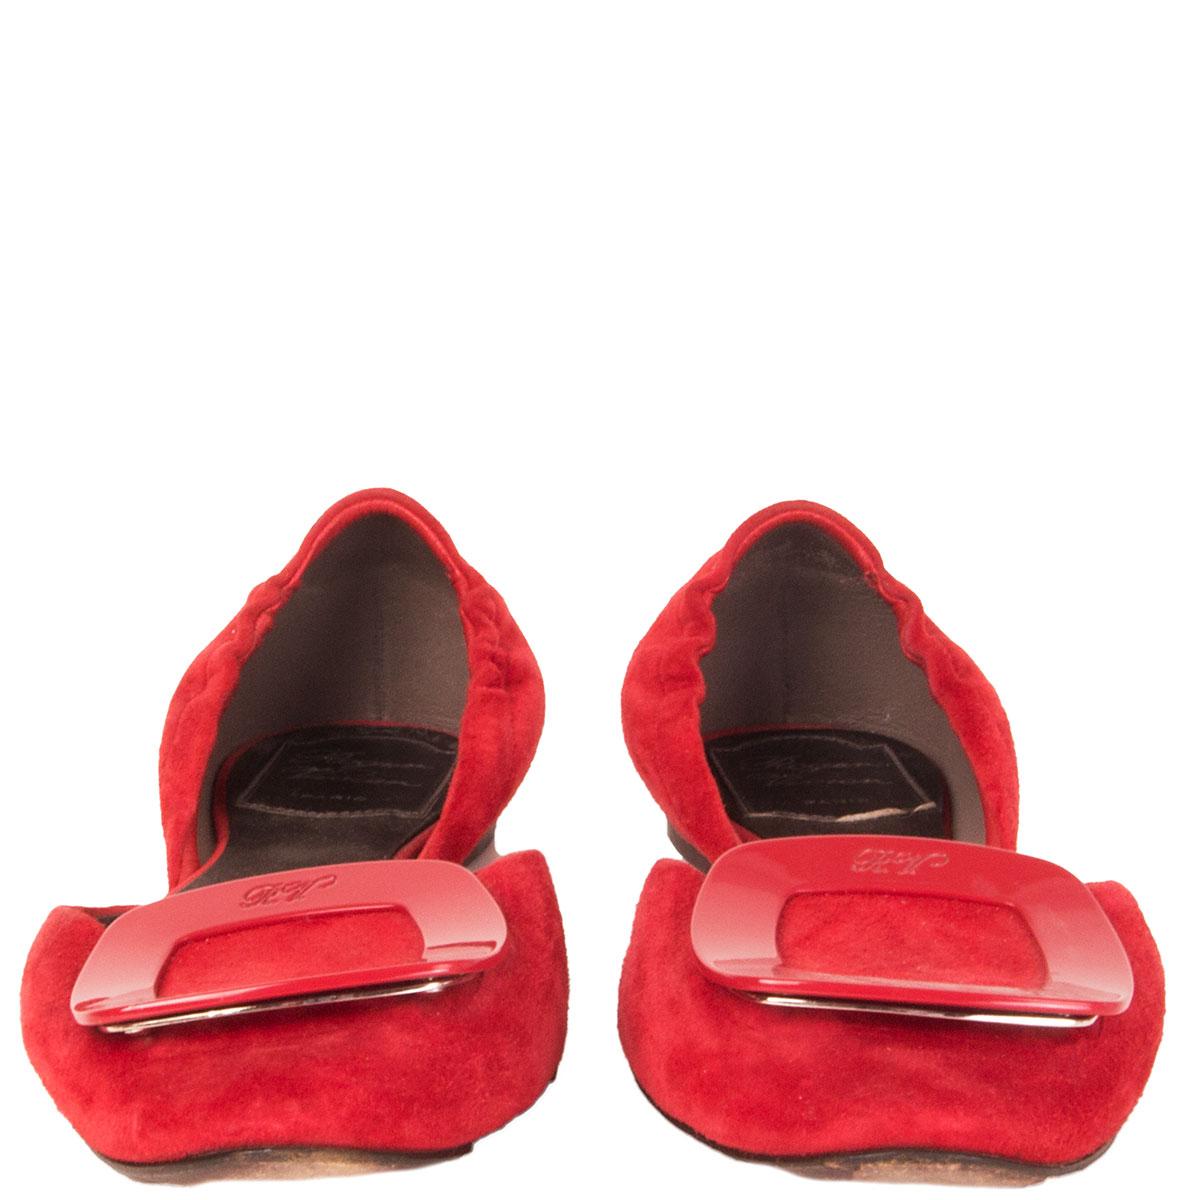 100% authentic Roger Vivier D'Orsay flats in red suede with dark brown satin lining and red metal buckle. Have been worn and are in excellent condition. 

Imprinted Size 36
Shoe Size 36
Inside Sole 23.5cm (9.2in)
Width 7.5cm (2.9in)

All our